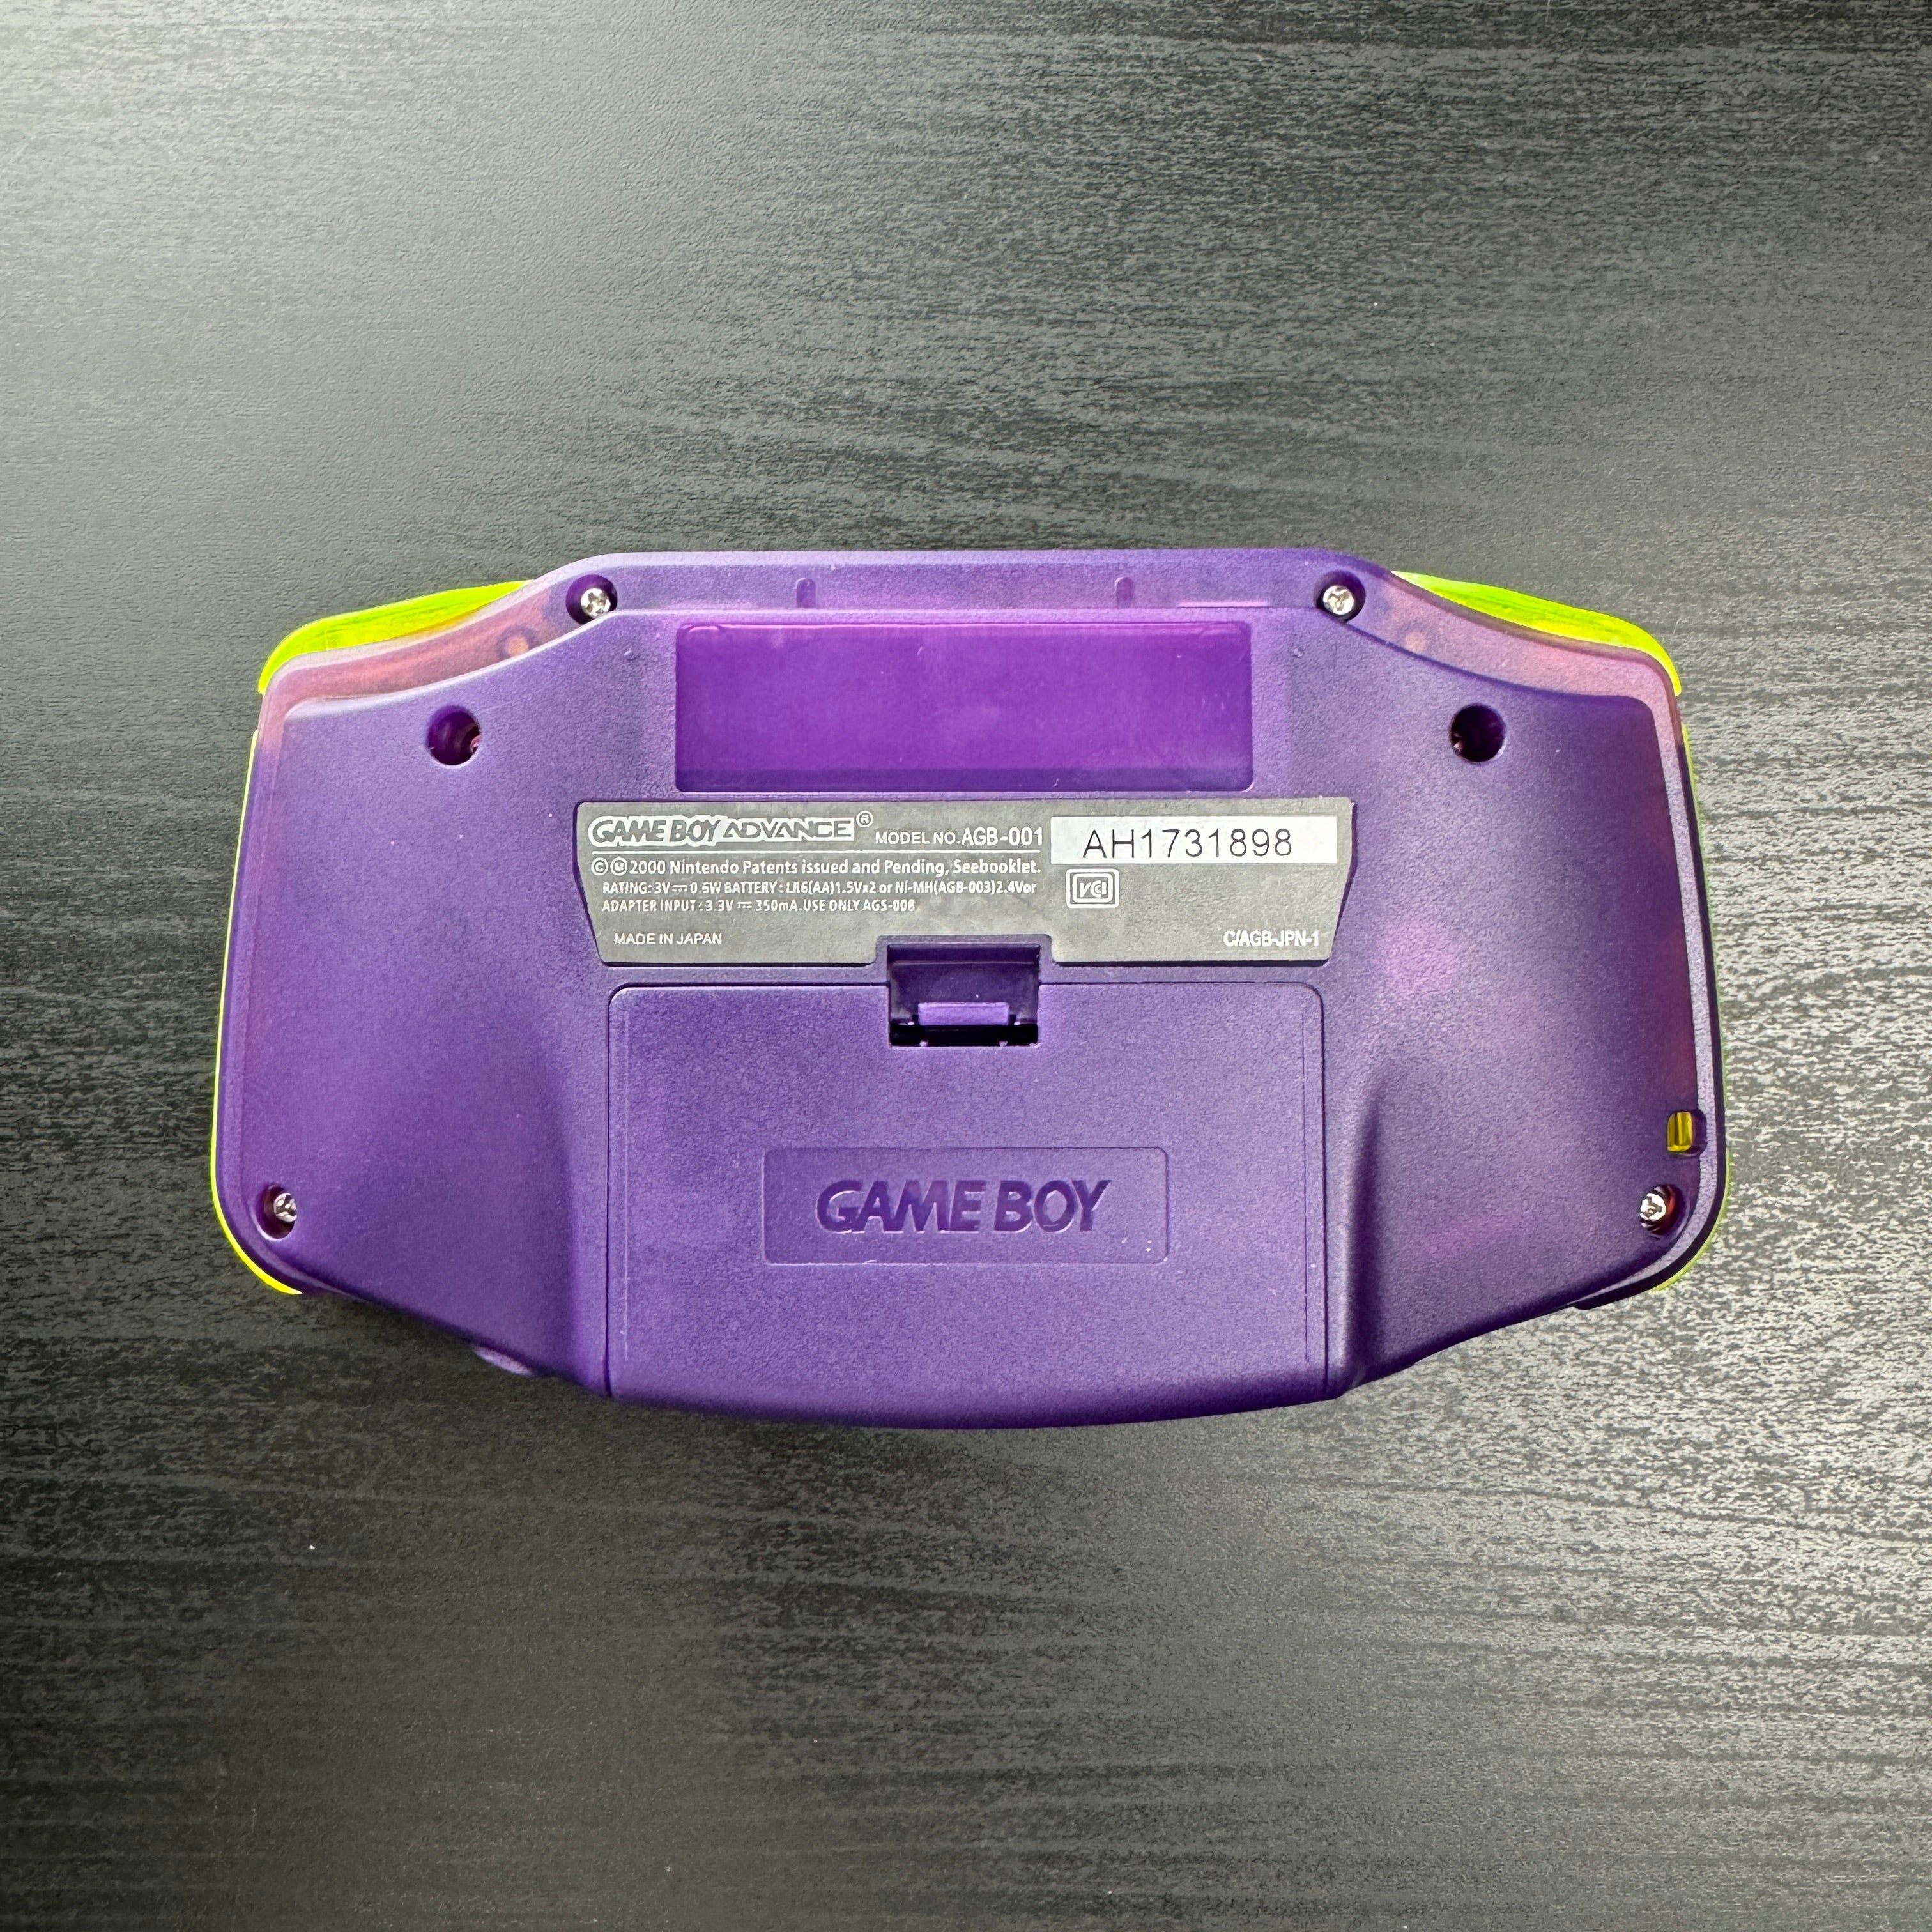 Modded Game Boy Advance W/ IPS V2 Screen (Clear Purple and Extreme Green)